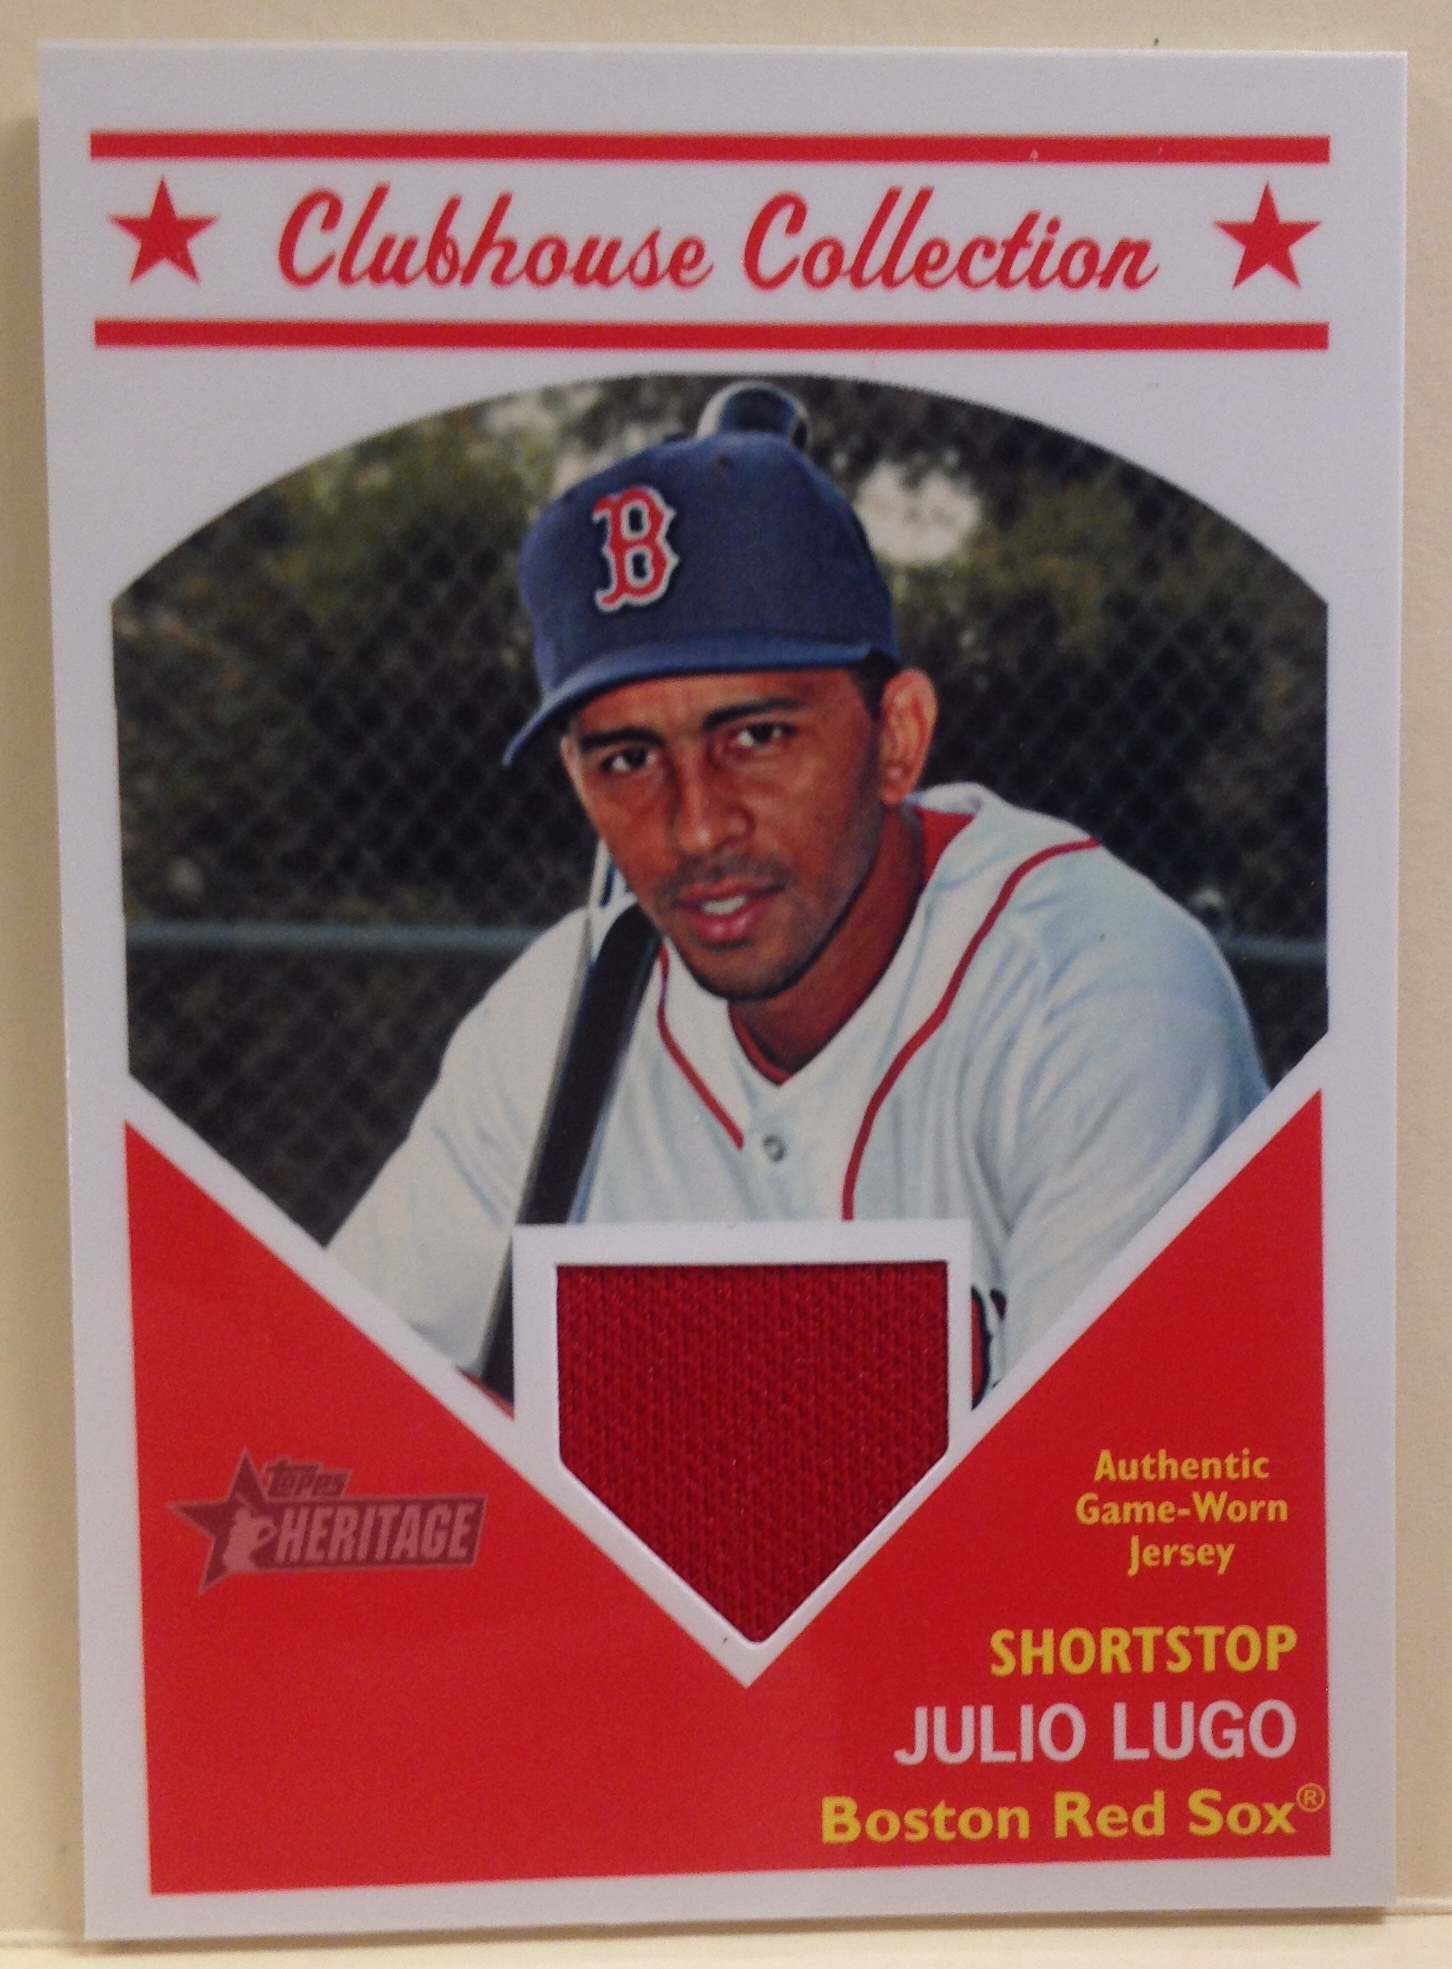 2008 Topps Heritage Clubhouse Collection Relics #JL Julio Lugo HN C